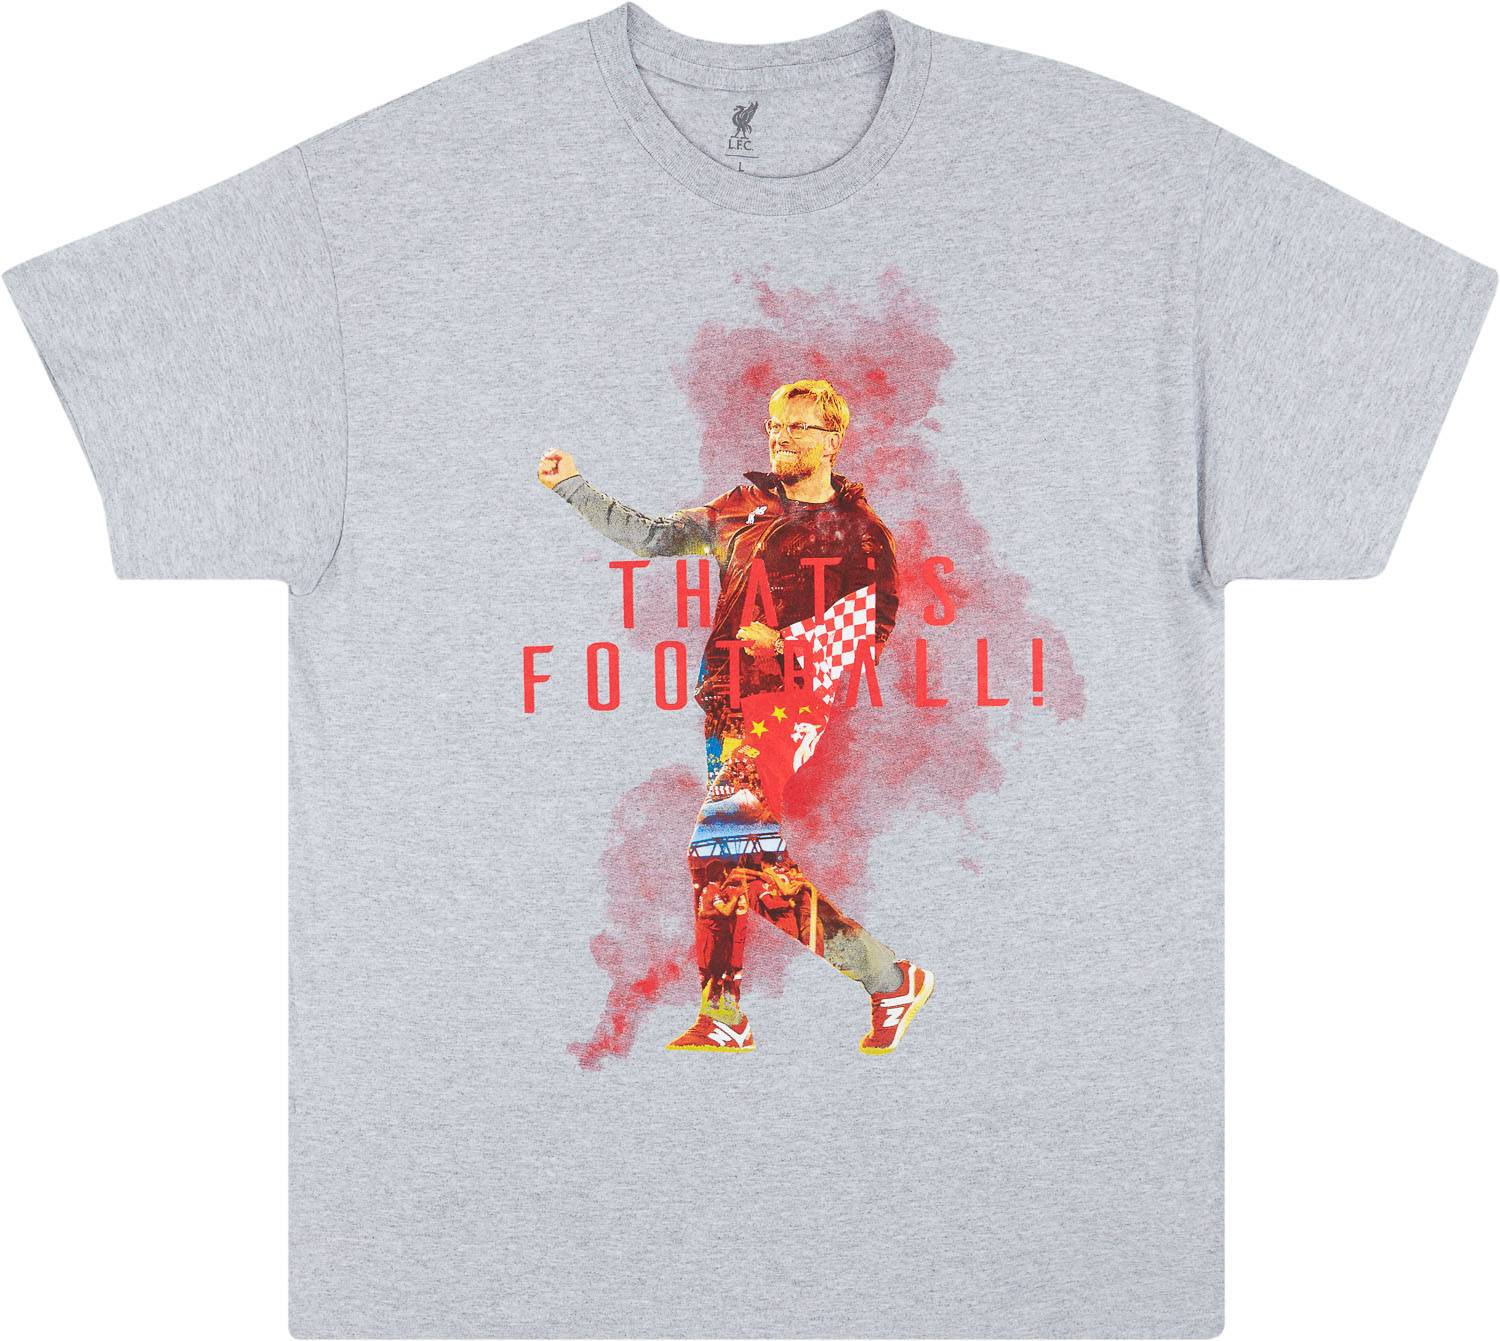 2019-20 Liverpool 'That's Football!' Graphic Tee